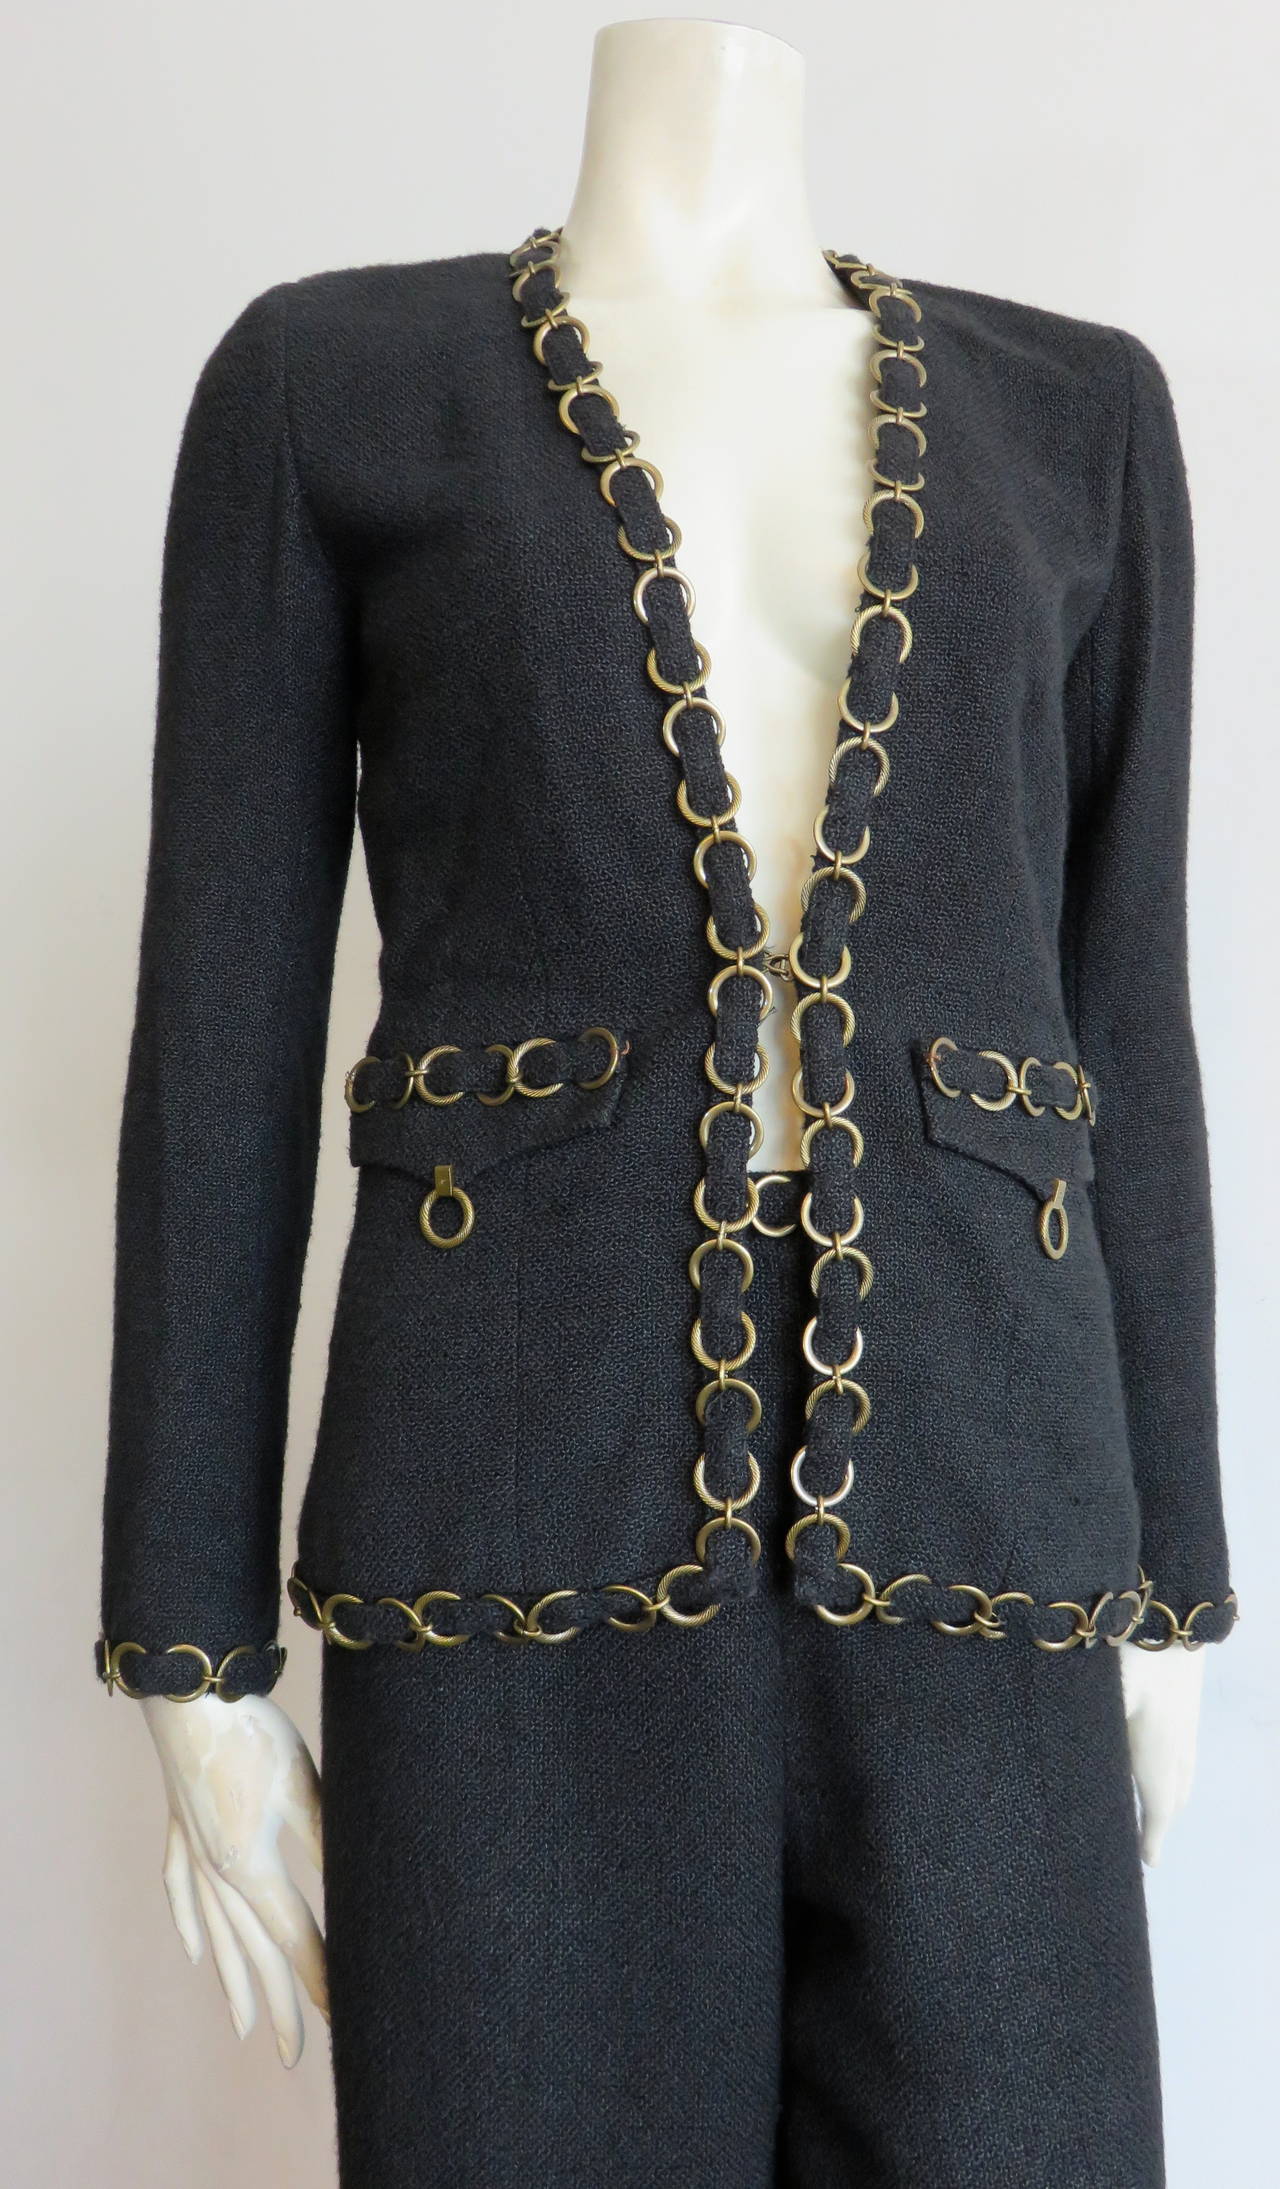 Great condition, CHANEL PARIS, metal ring-chain detail pant suit.

Fabulous, pant suit featuring large, brass, metal ring chain detailing interlaced with self-fabric binding.

Metal ring chains are logo engraved at the front flap pockets as